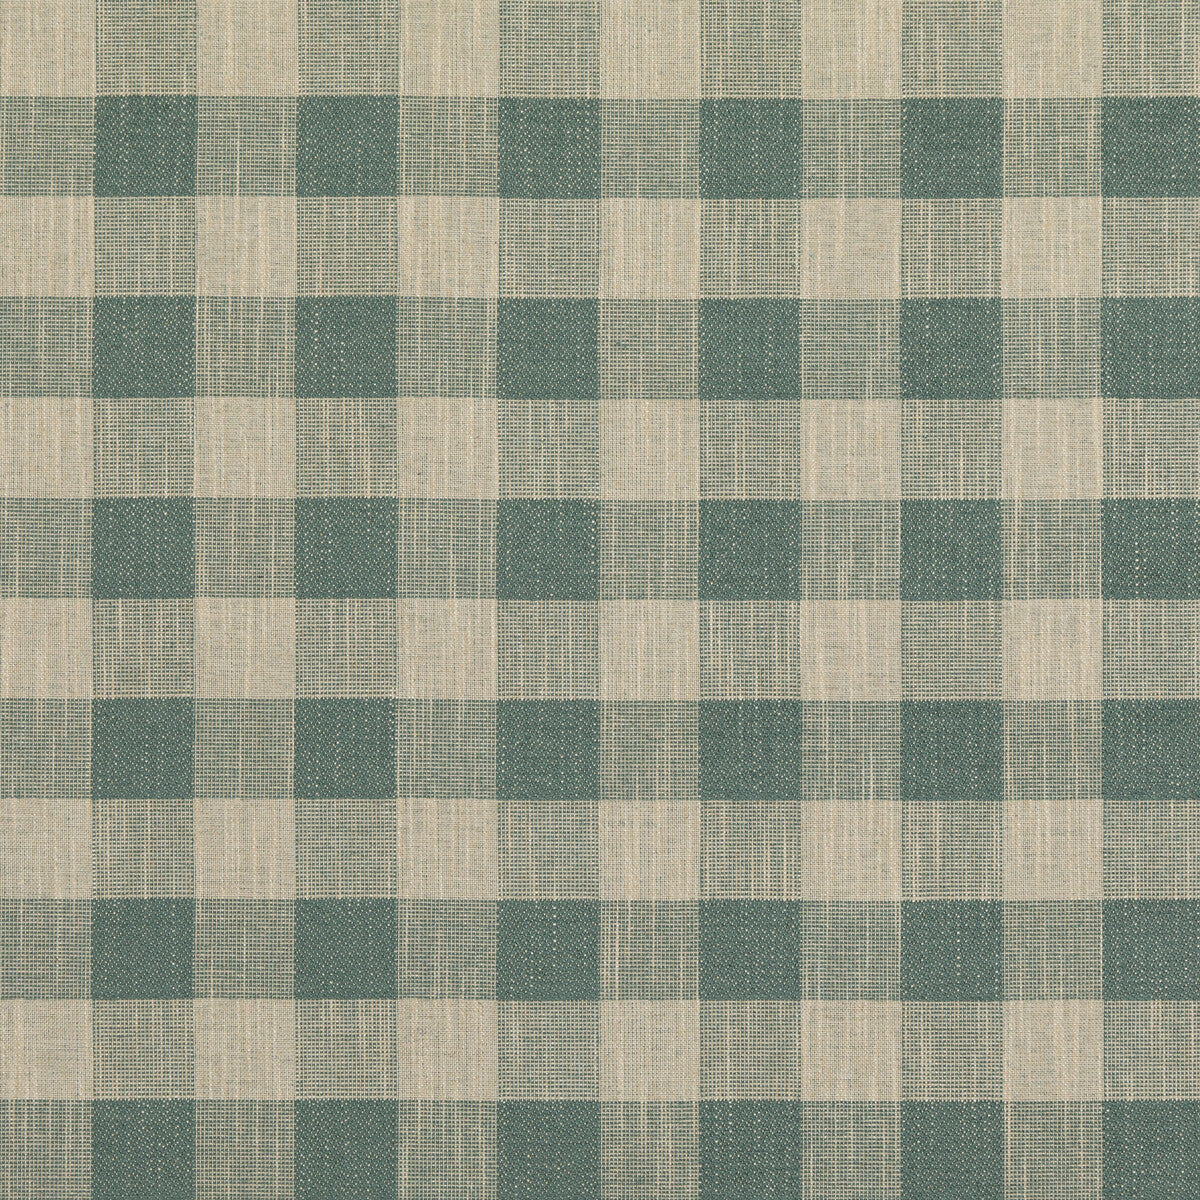 Block Check fabric in aqua color - pattern PF50490.725.0 - by Baker Lifestyle in the Block Weaves collection